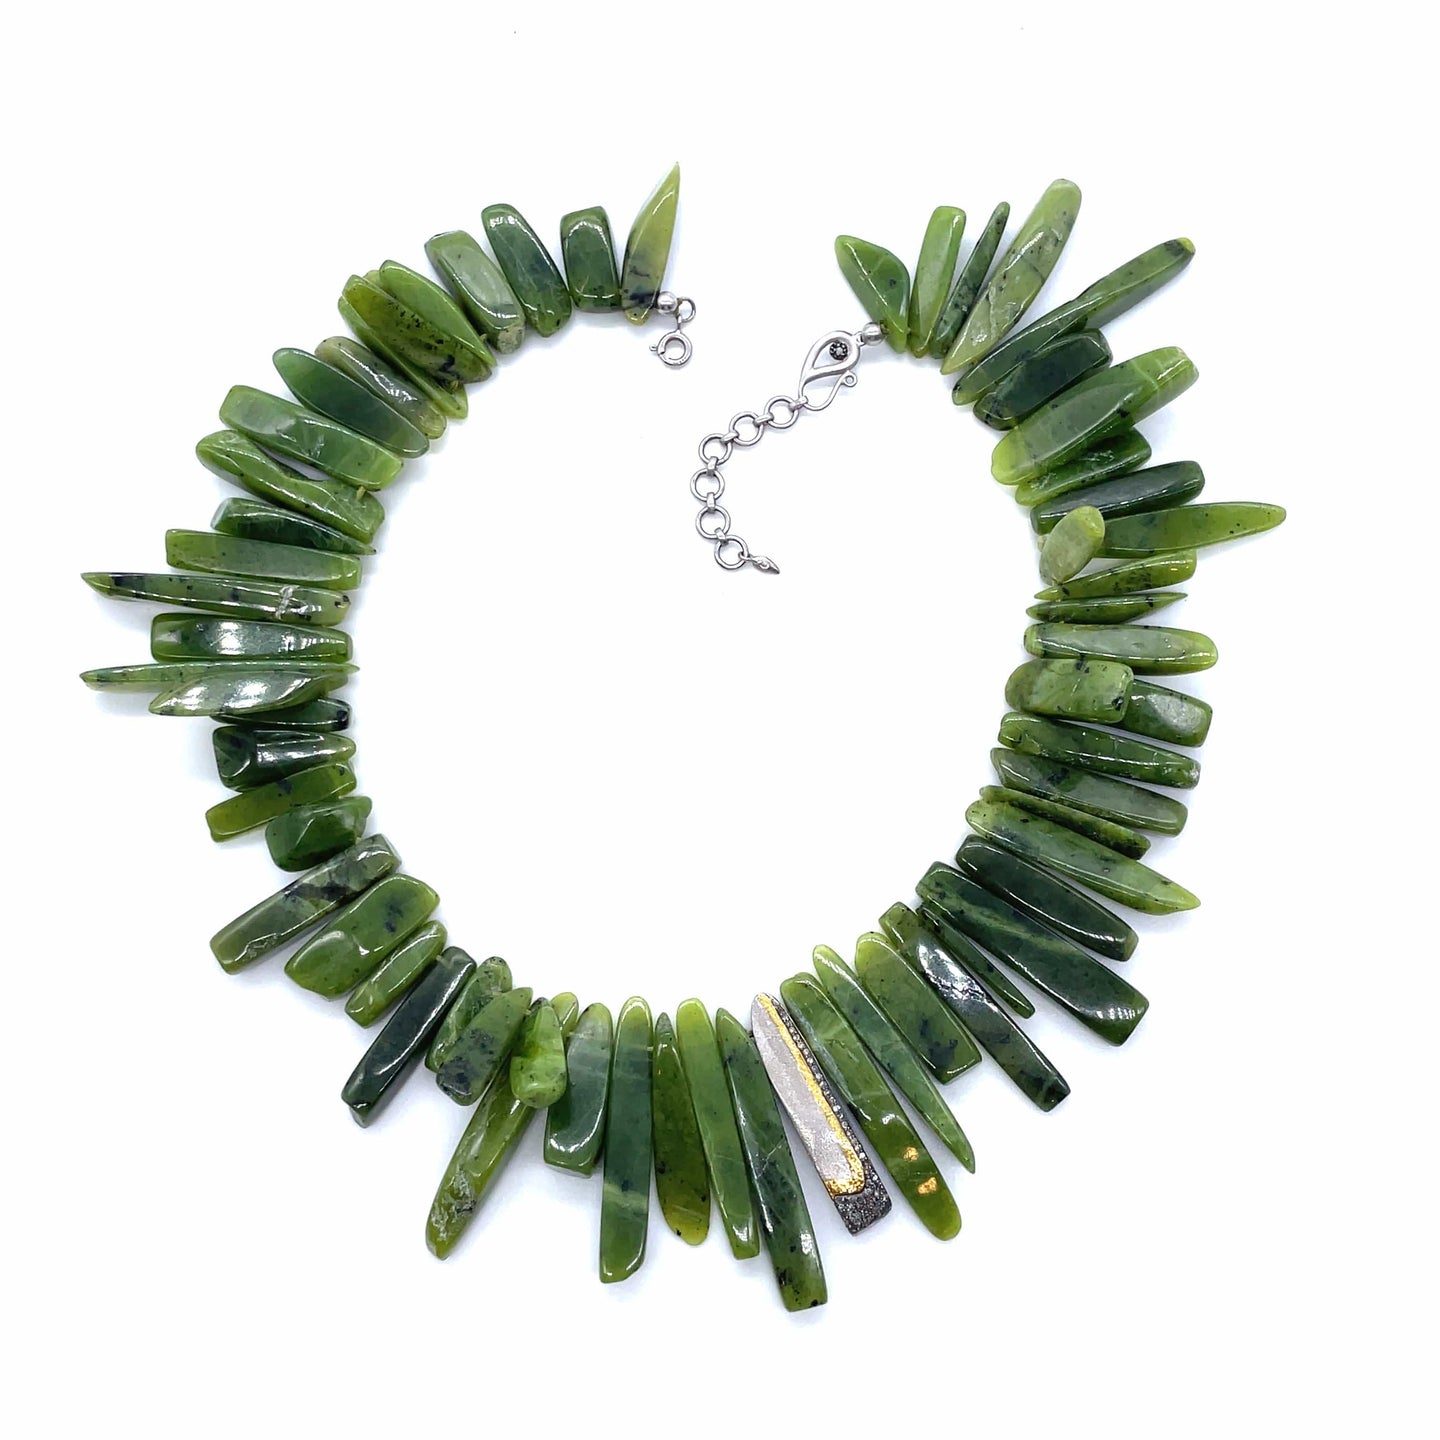 Jade and Diamond Necklace - Coomi